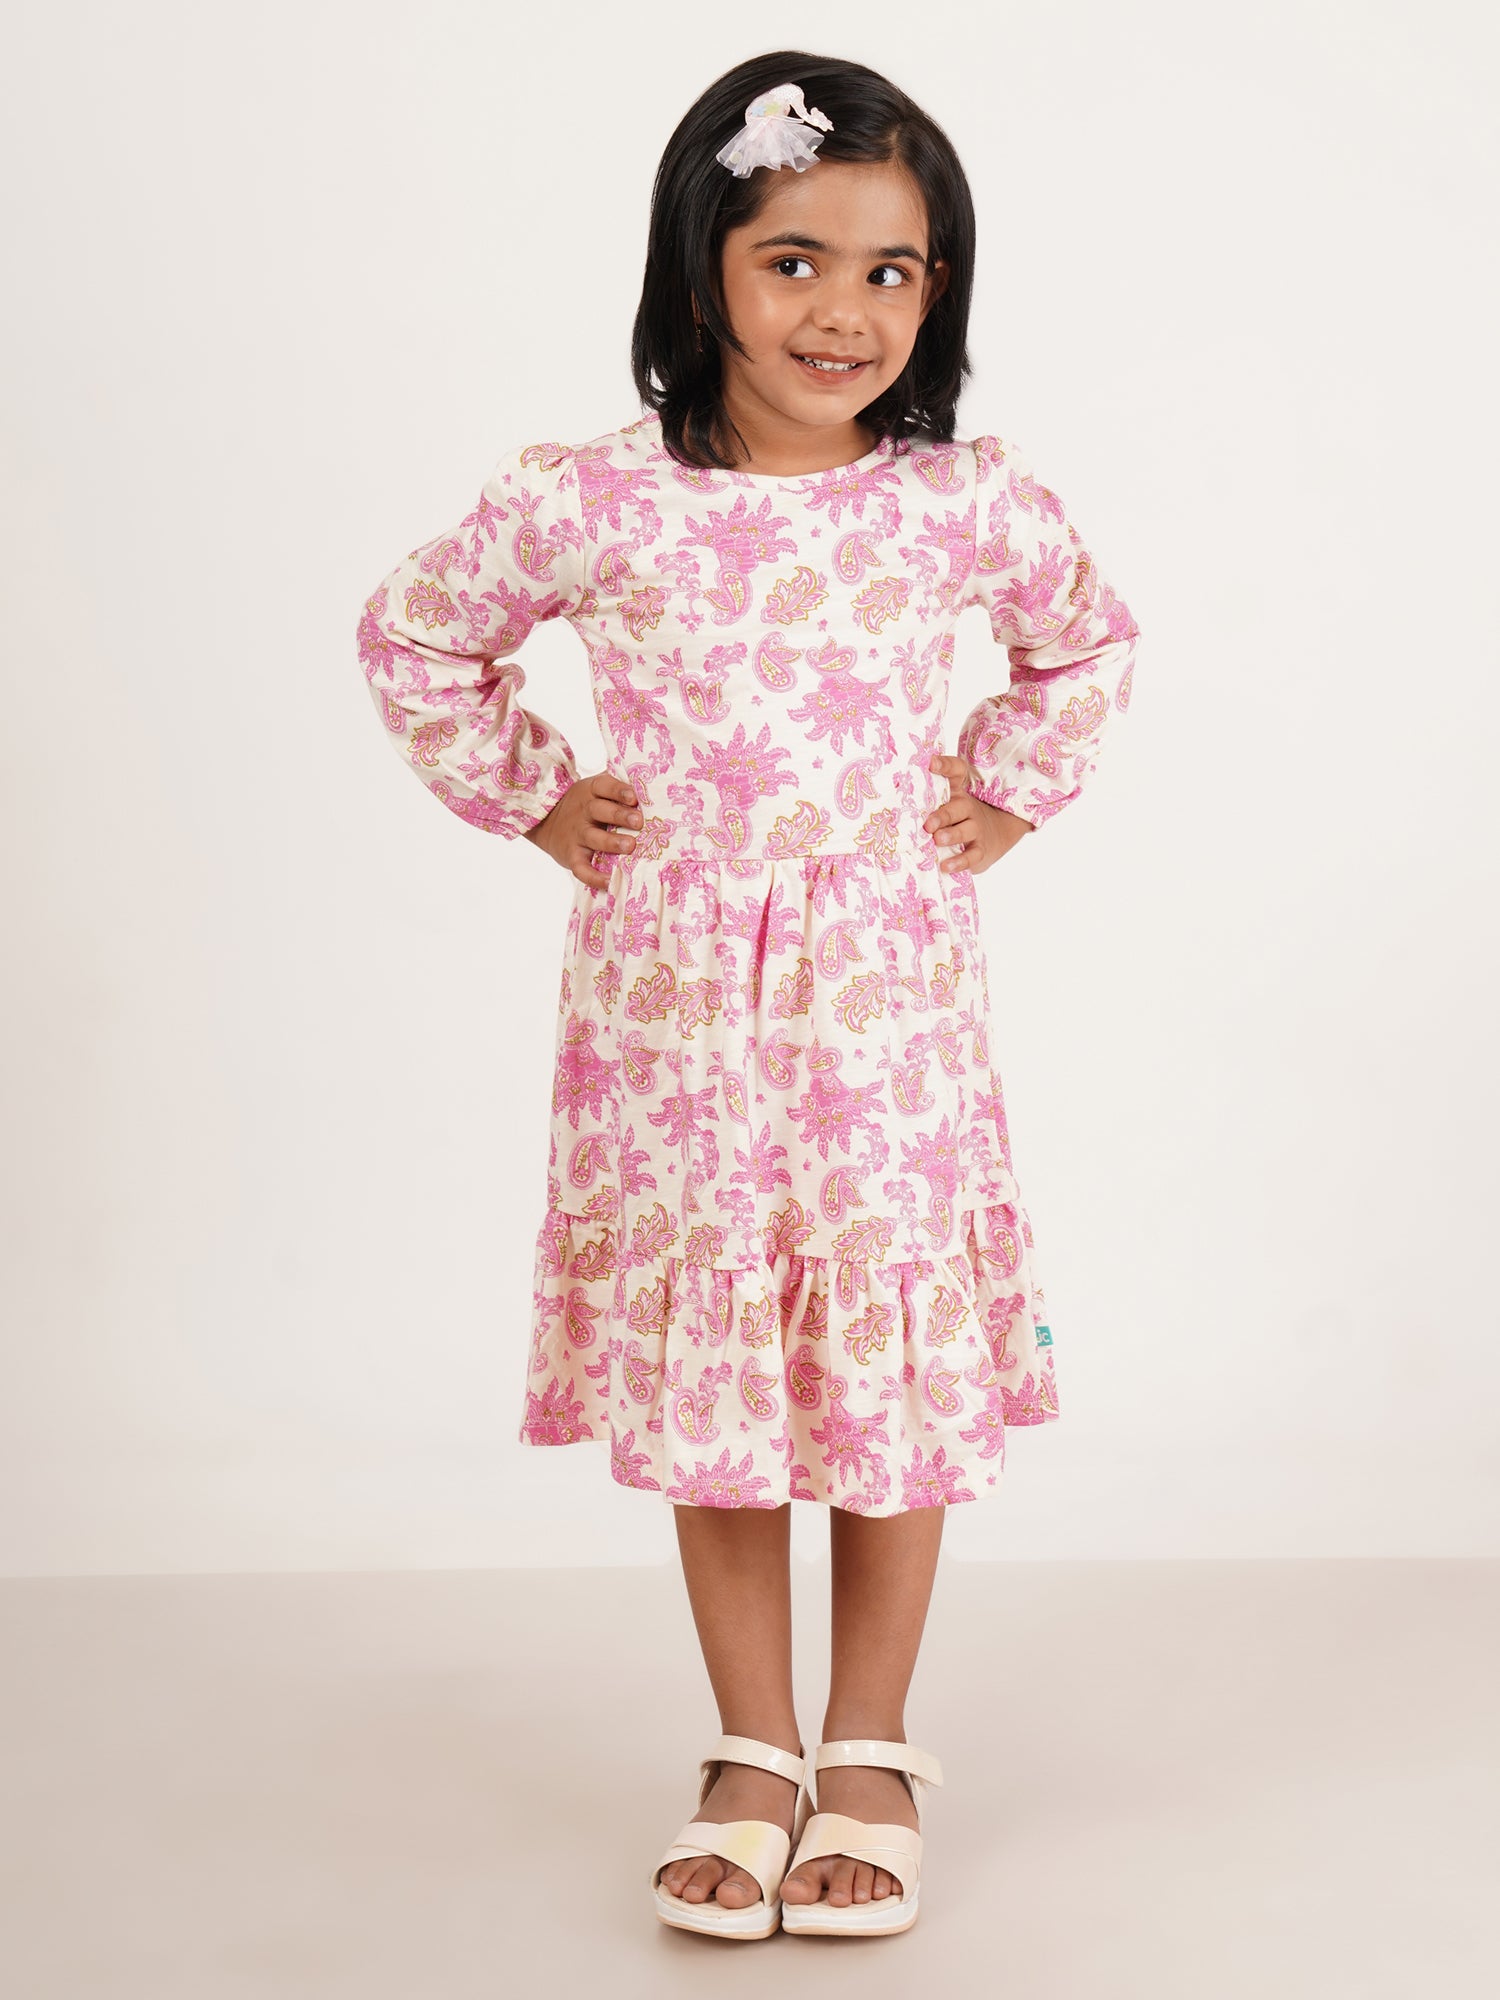 Girls Ethnic Motifs Printed Gathered Or Pleated Cotton A Line Dress